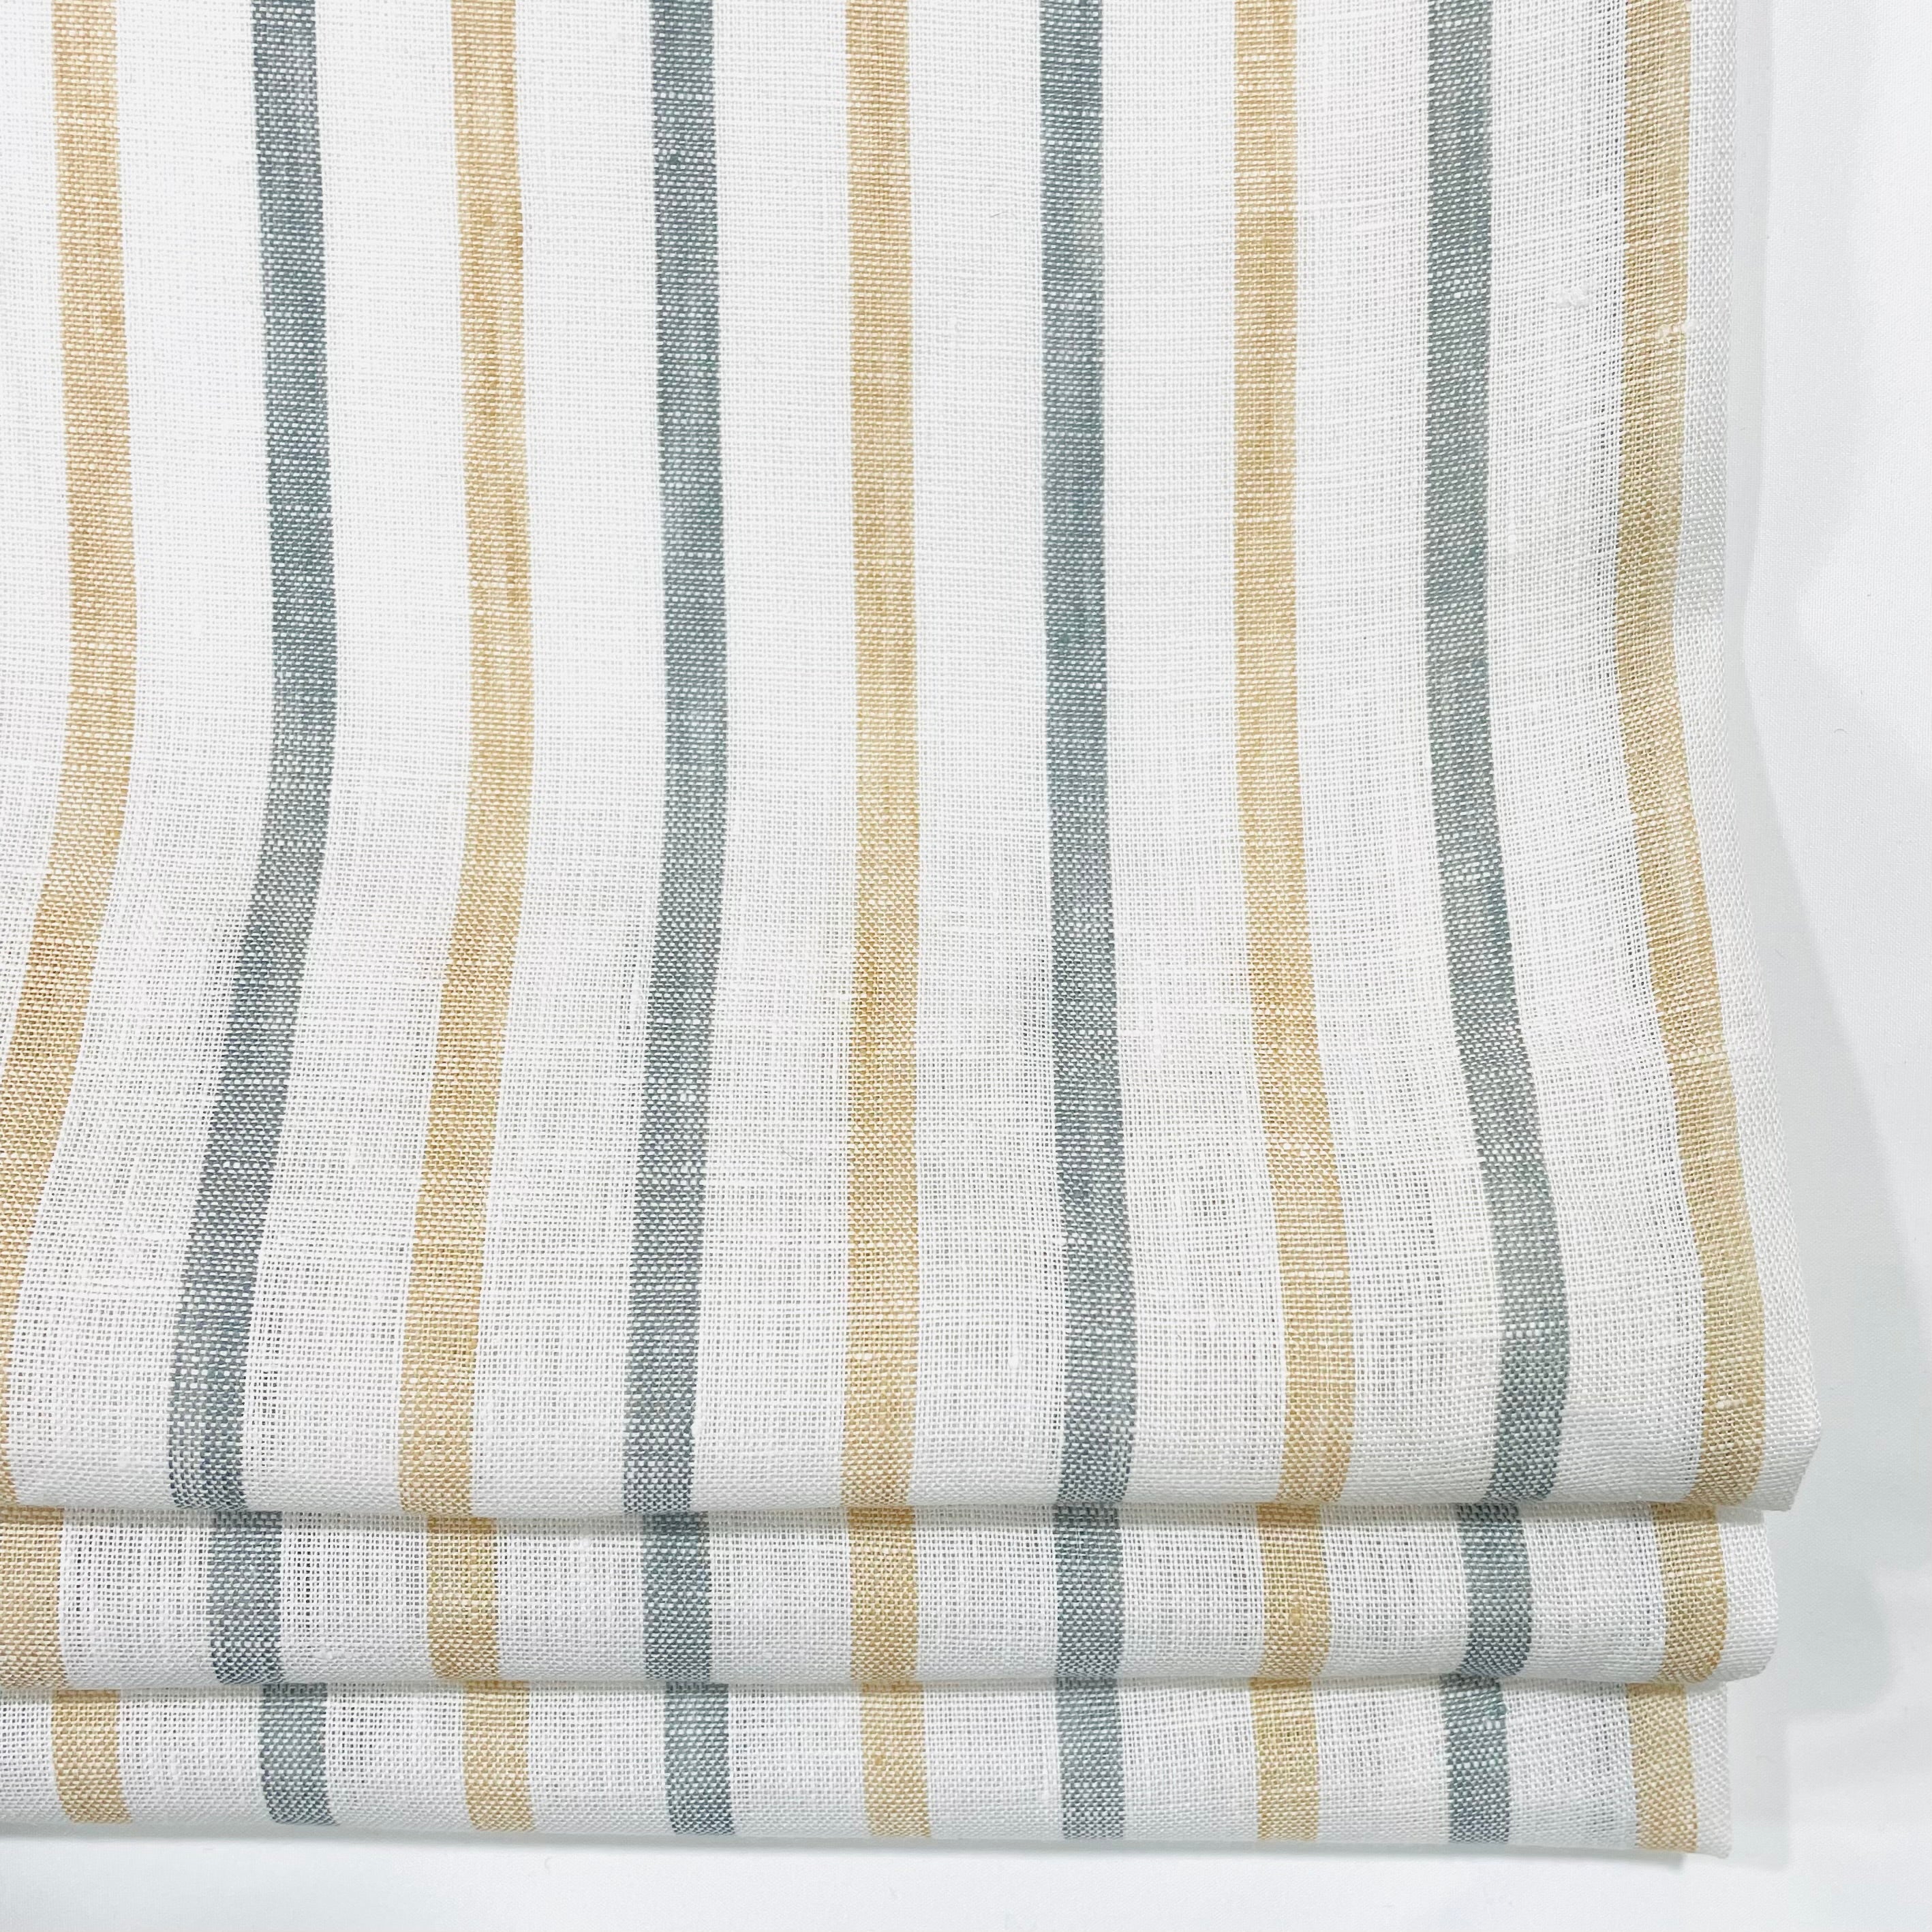 Green Yellow Striped 100% Natural Linen Flat Relaxed Casual Roman Shade